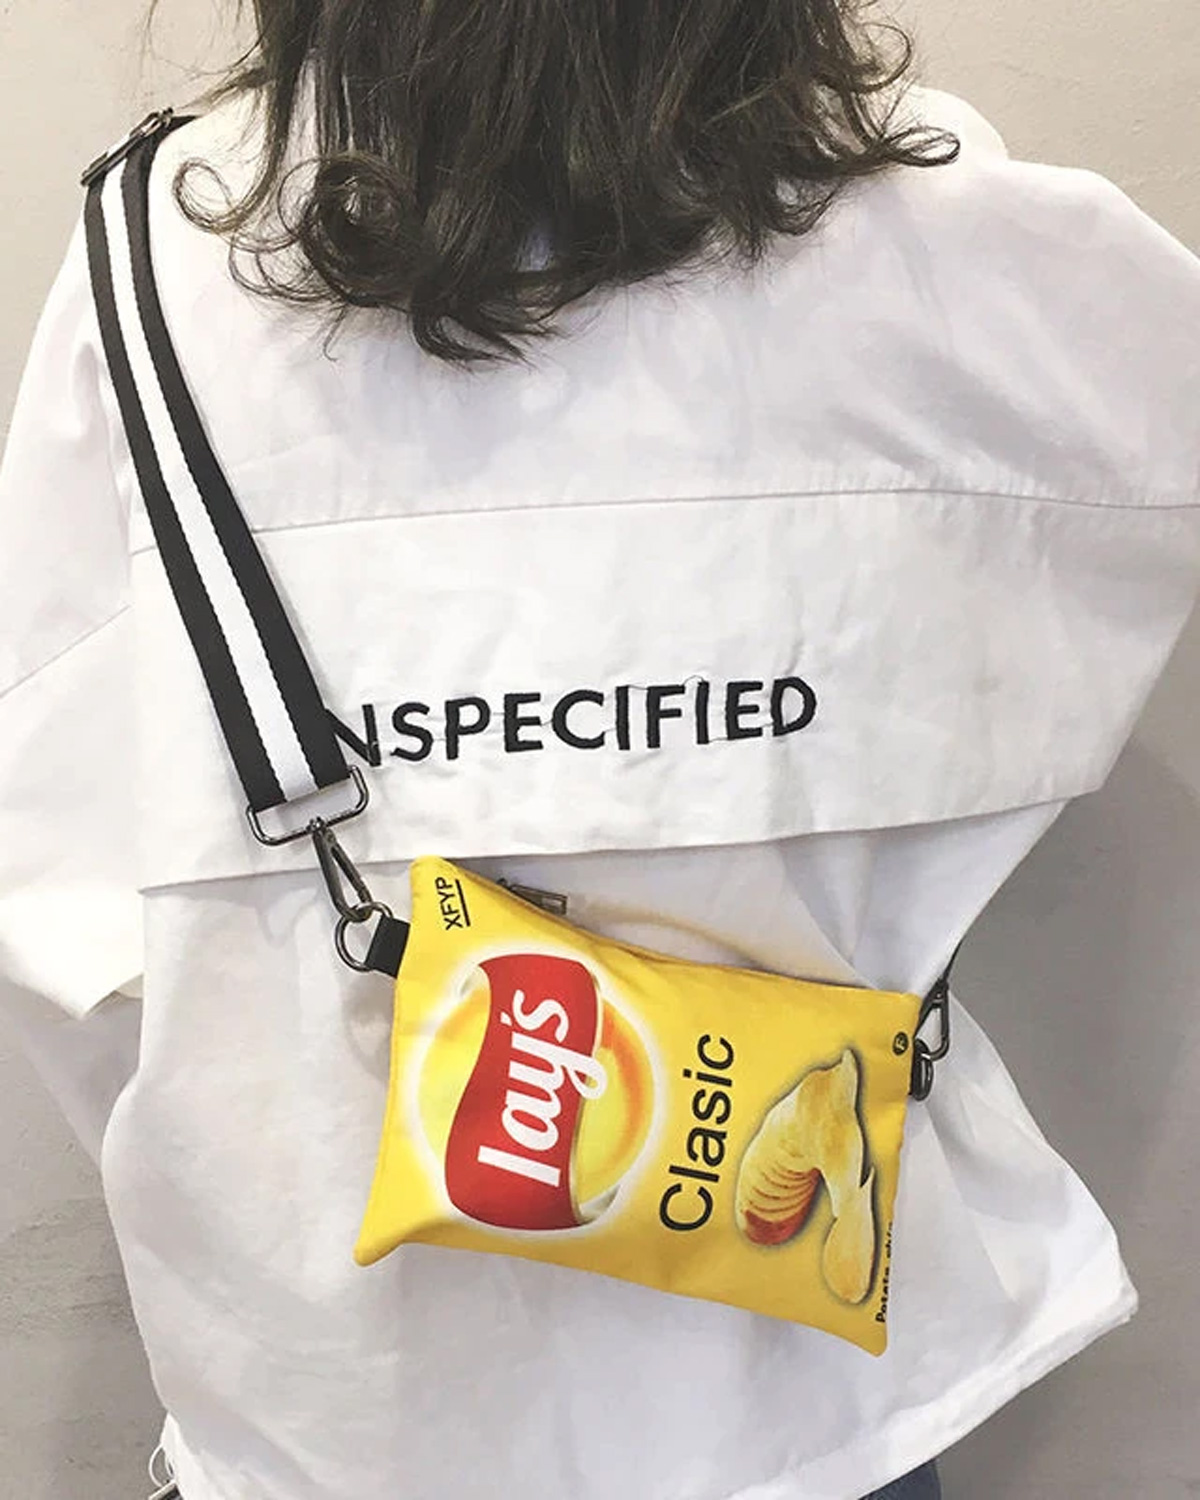 Balenciaga has created a bag that resembles a pack of Lay's potato chips